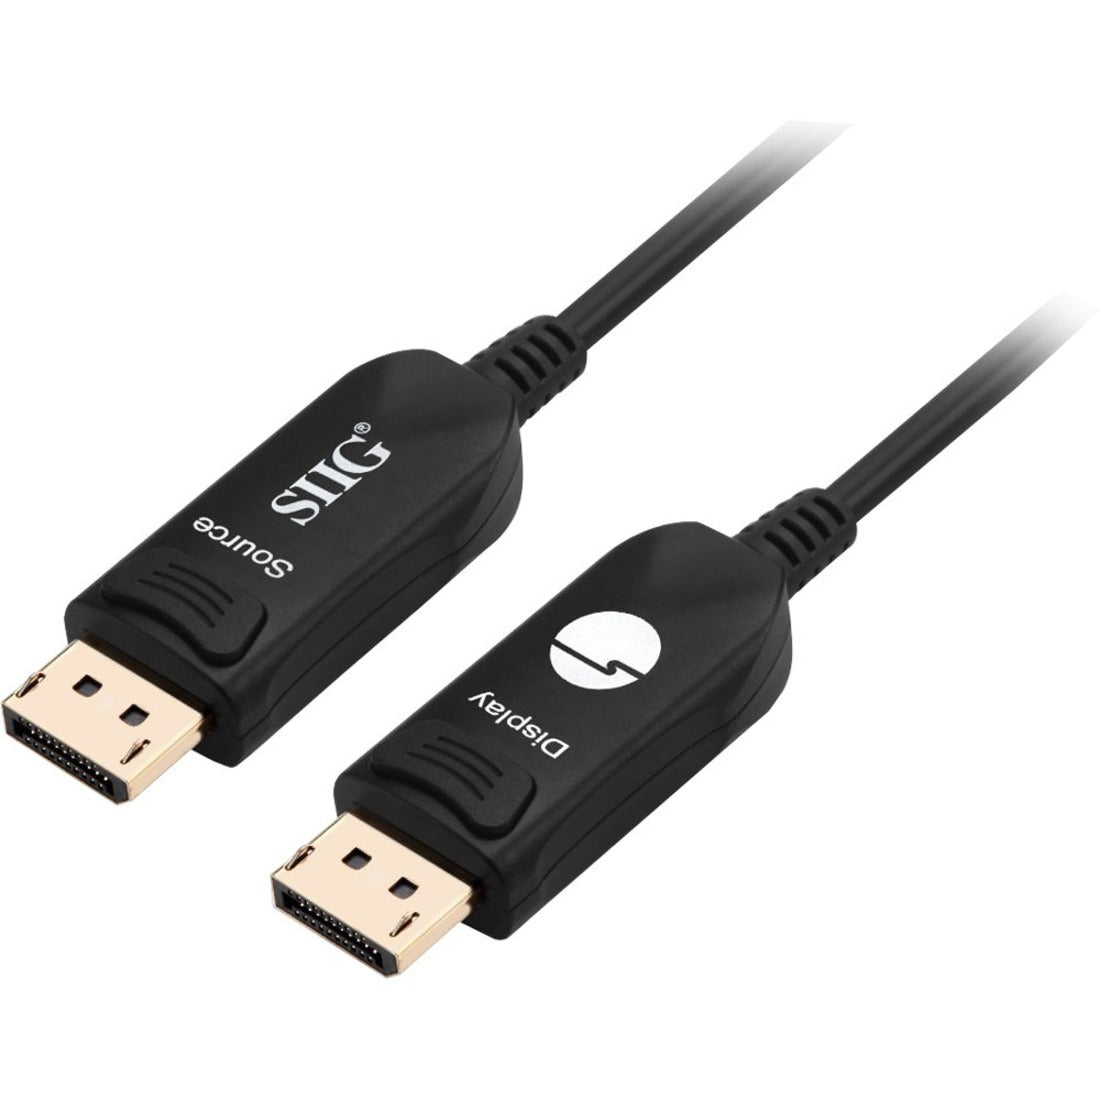 SIIG CB-DP2511-S1 4K DisplayPort 1.2 AOC Cable - 60M, Plug & Play, 21.6 Gbit/s Data Transfer Rate, 196.85 ft Cable Length